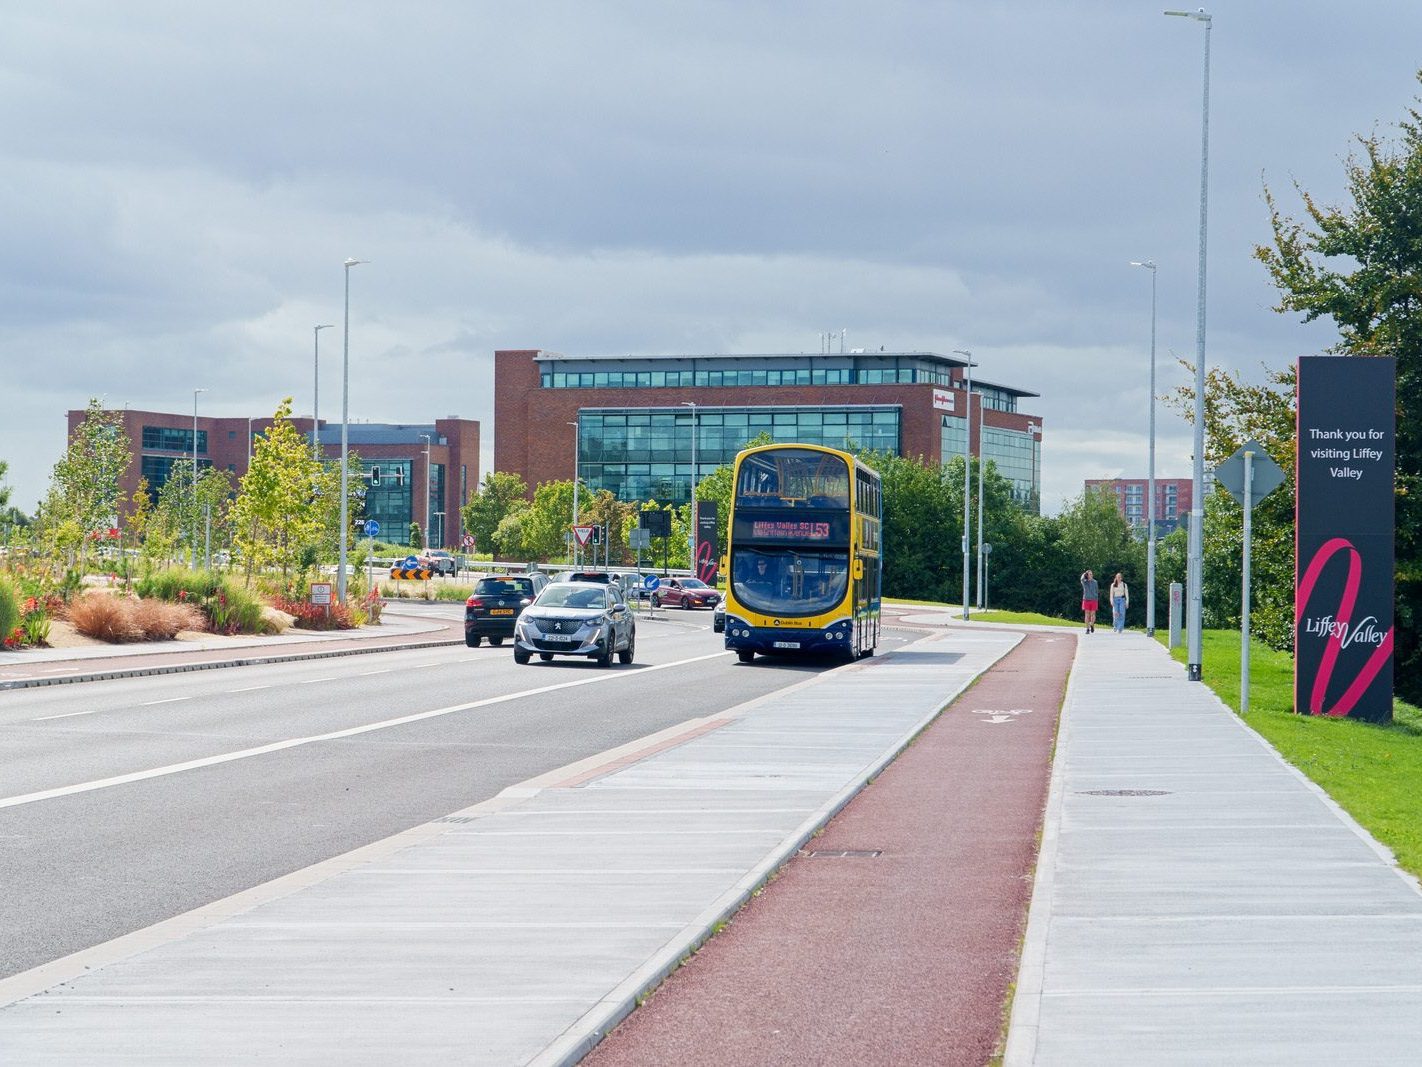 THE NEW BUS PLAZA THAT I DID NOT KNOW ABOUT [AT LIFFEY VALLEY SHOPPING CENTRE] 016